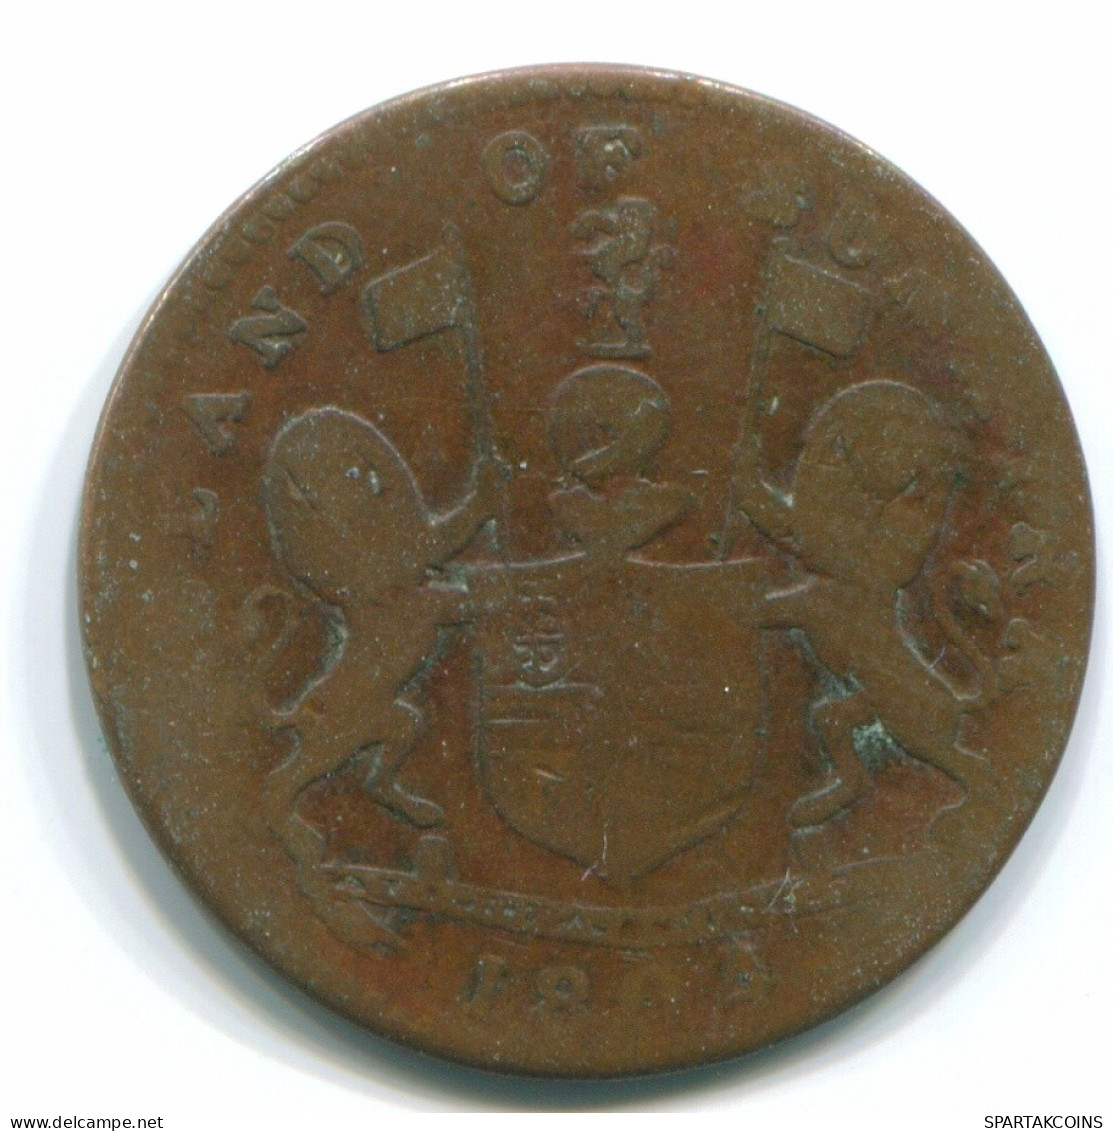 1 KEPING 1804 SUMATRA BRITISH EAST INDIES Copper Colonial Coin #S11794.U.A - Indien